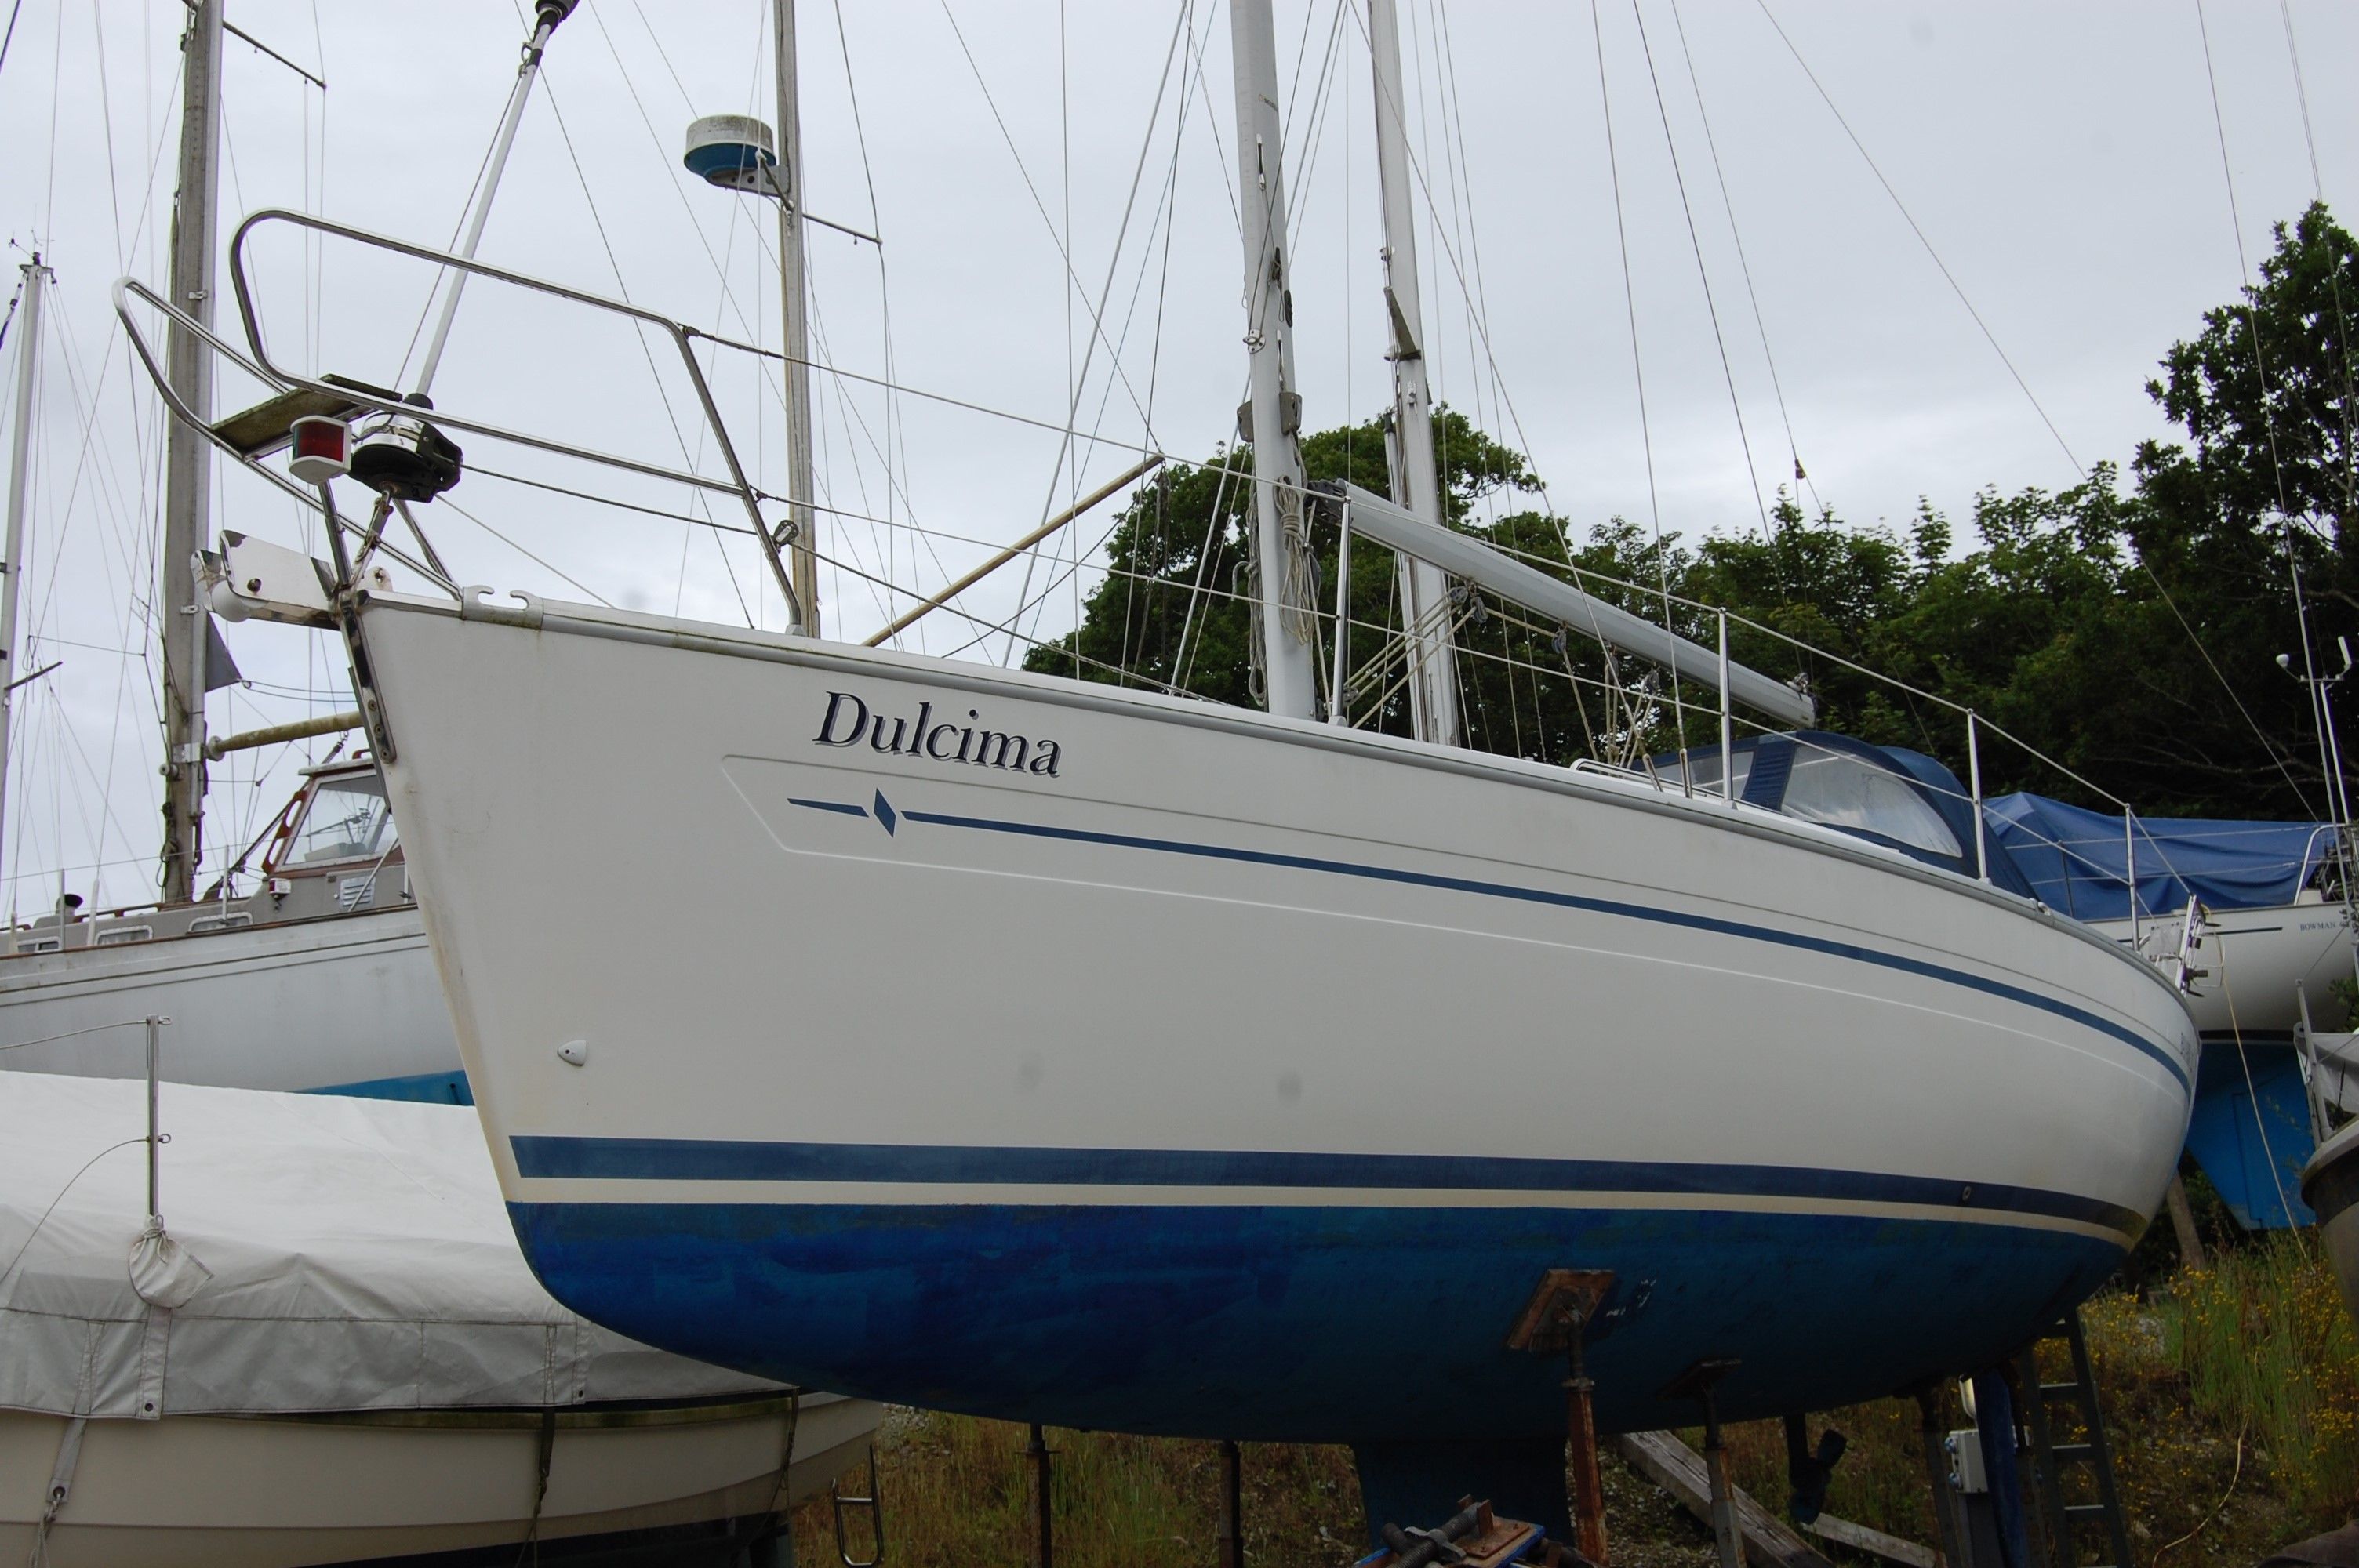 32 ft sailing yachts for sale uk